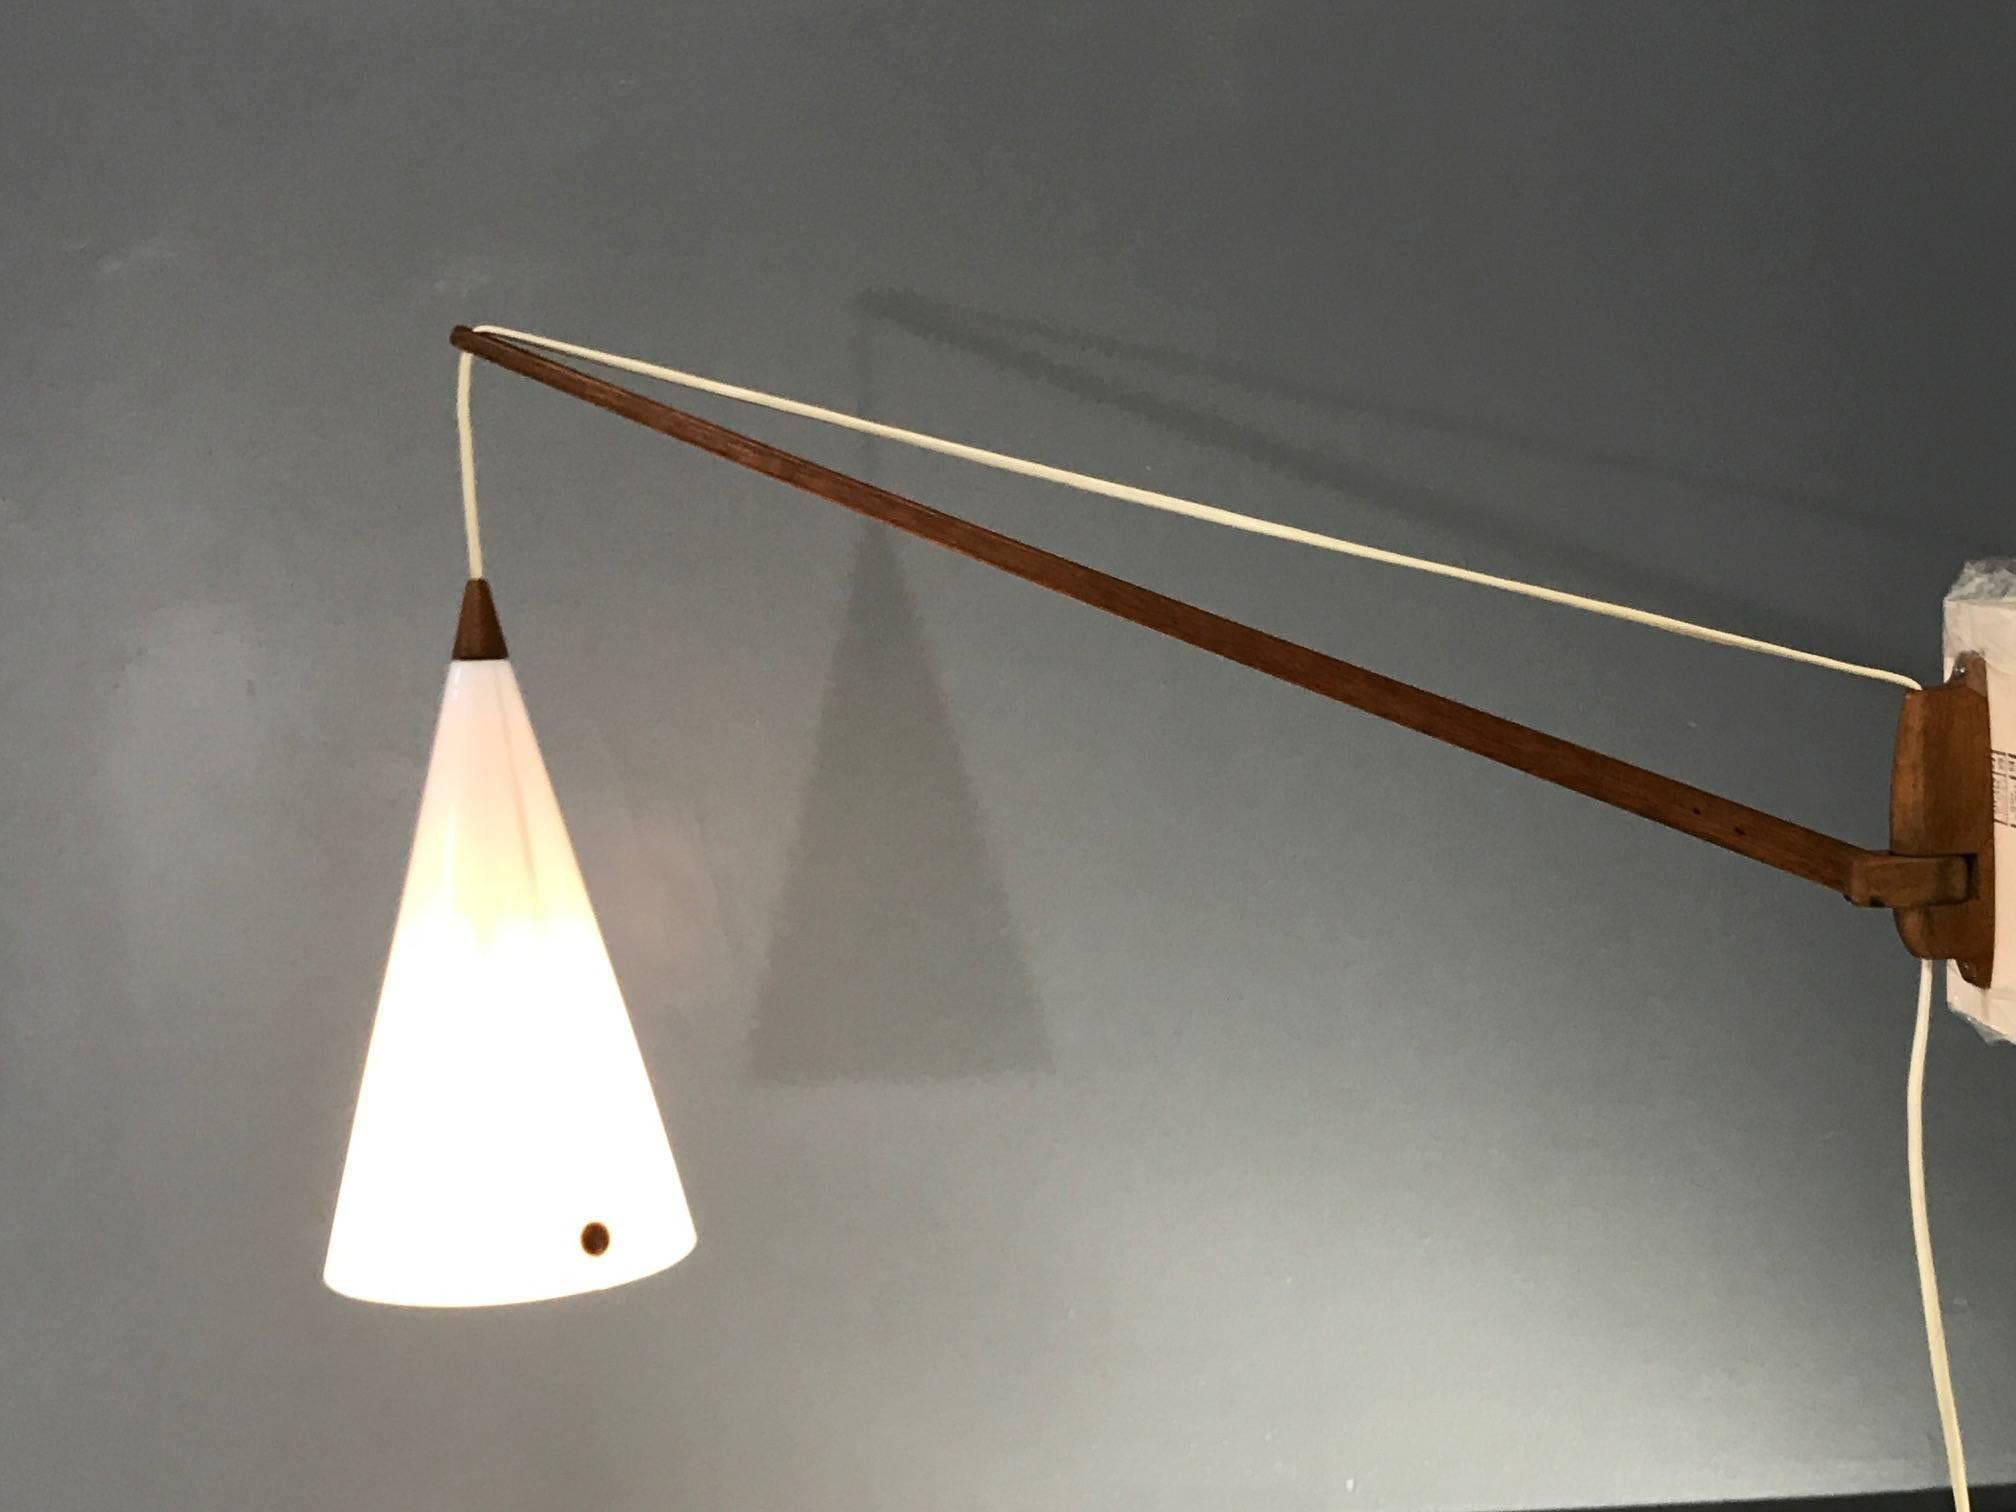 A Luxus Vittsjo swing arm lamp with the original plastic lampshade. (Designed by Osten and/or Uno Kristiansson.).